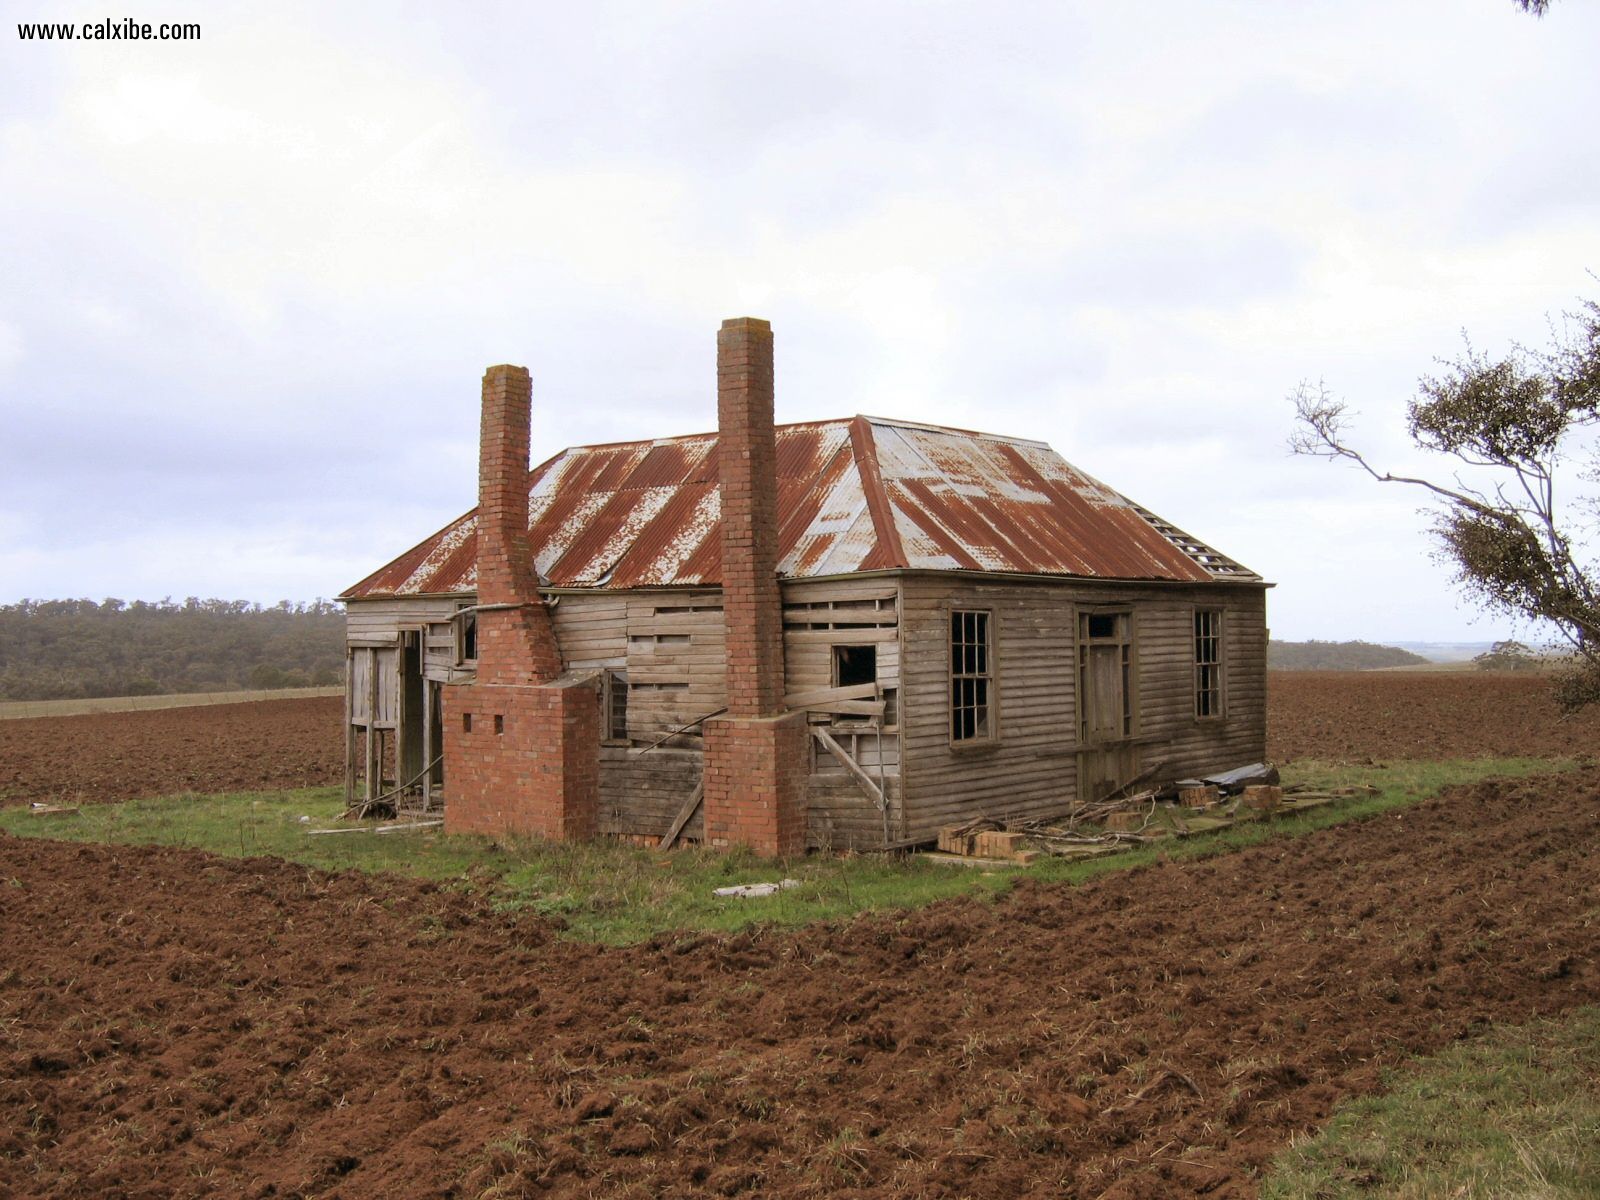 Miscellaneous Country Old Farmhouse picture nr 11482 1600x1200